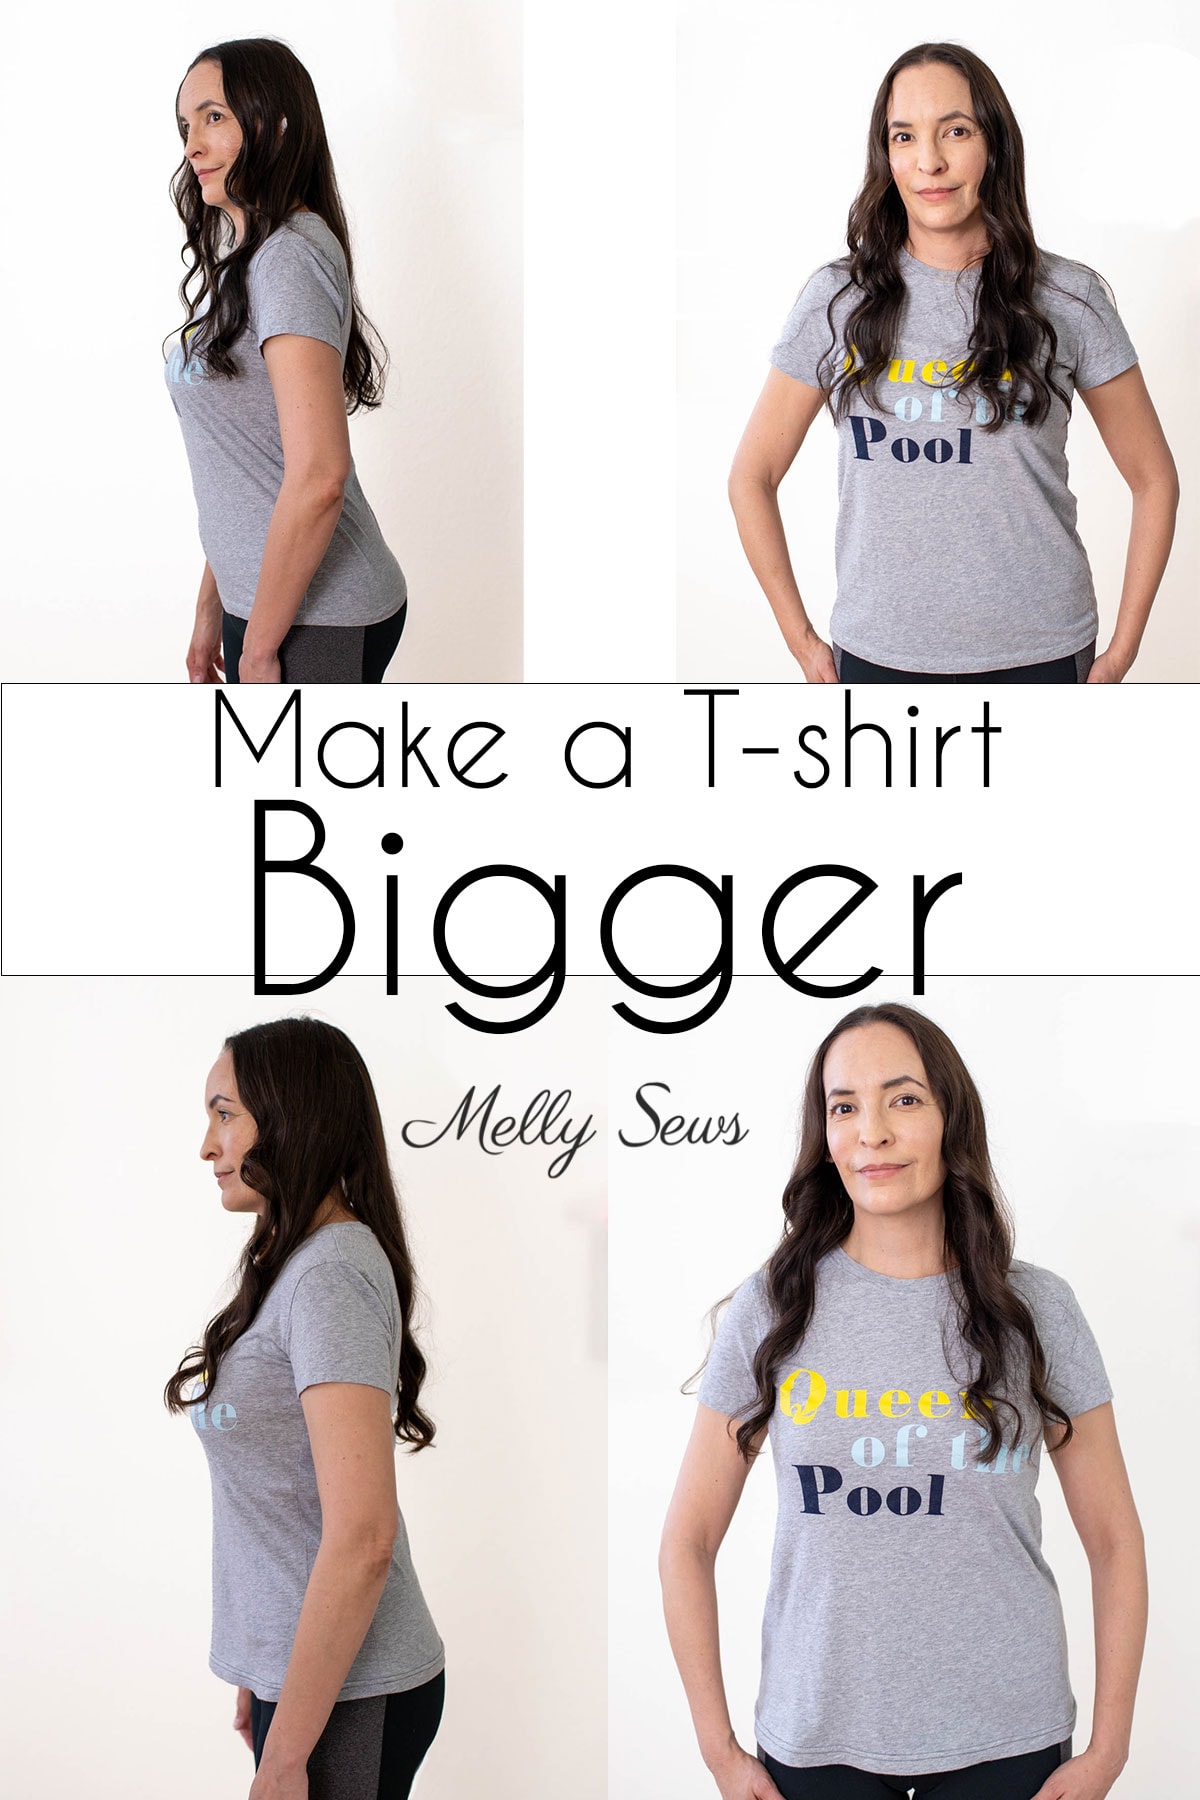 How To Make A Shirt Bigger: Video & Tutorial for a T-shirt - Melly